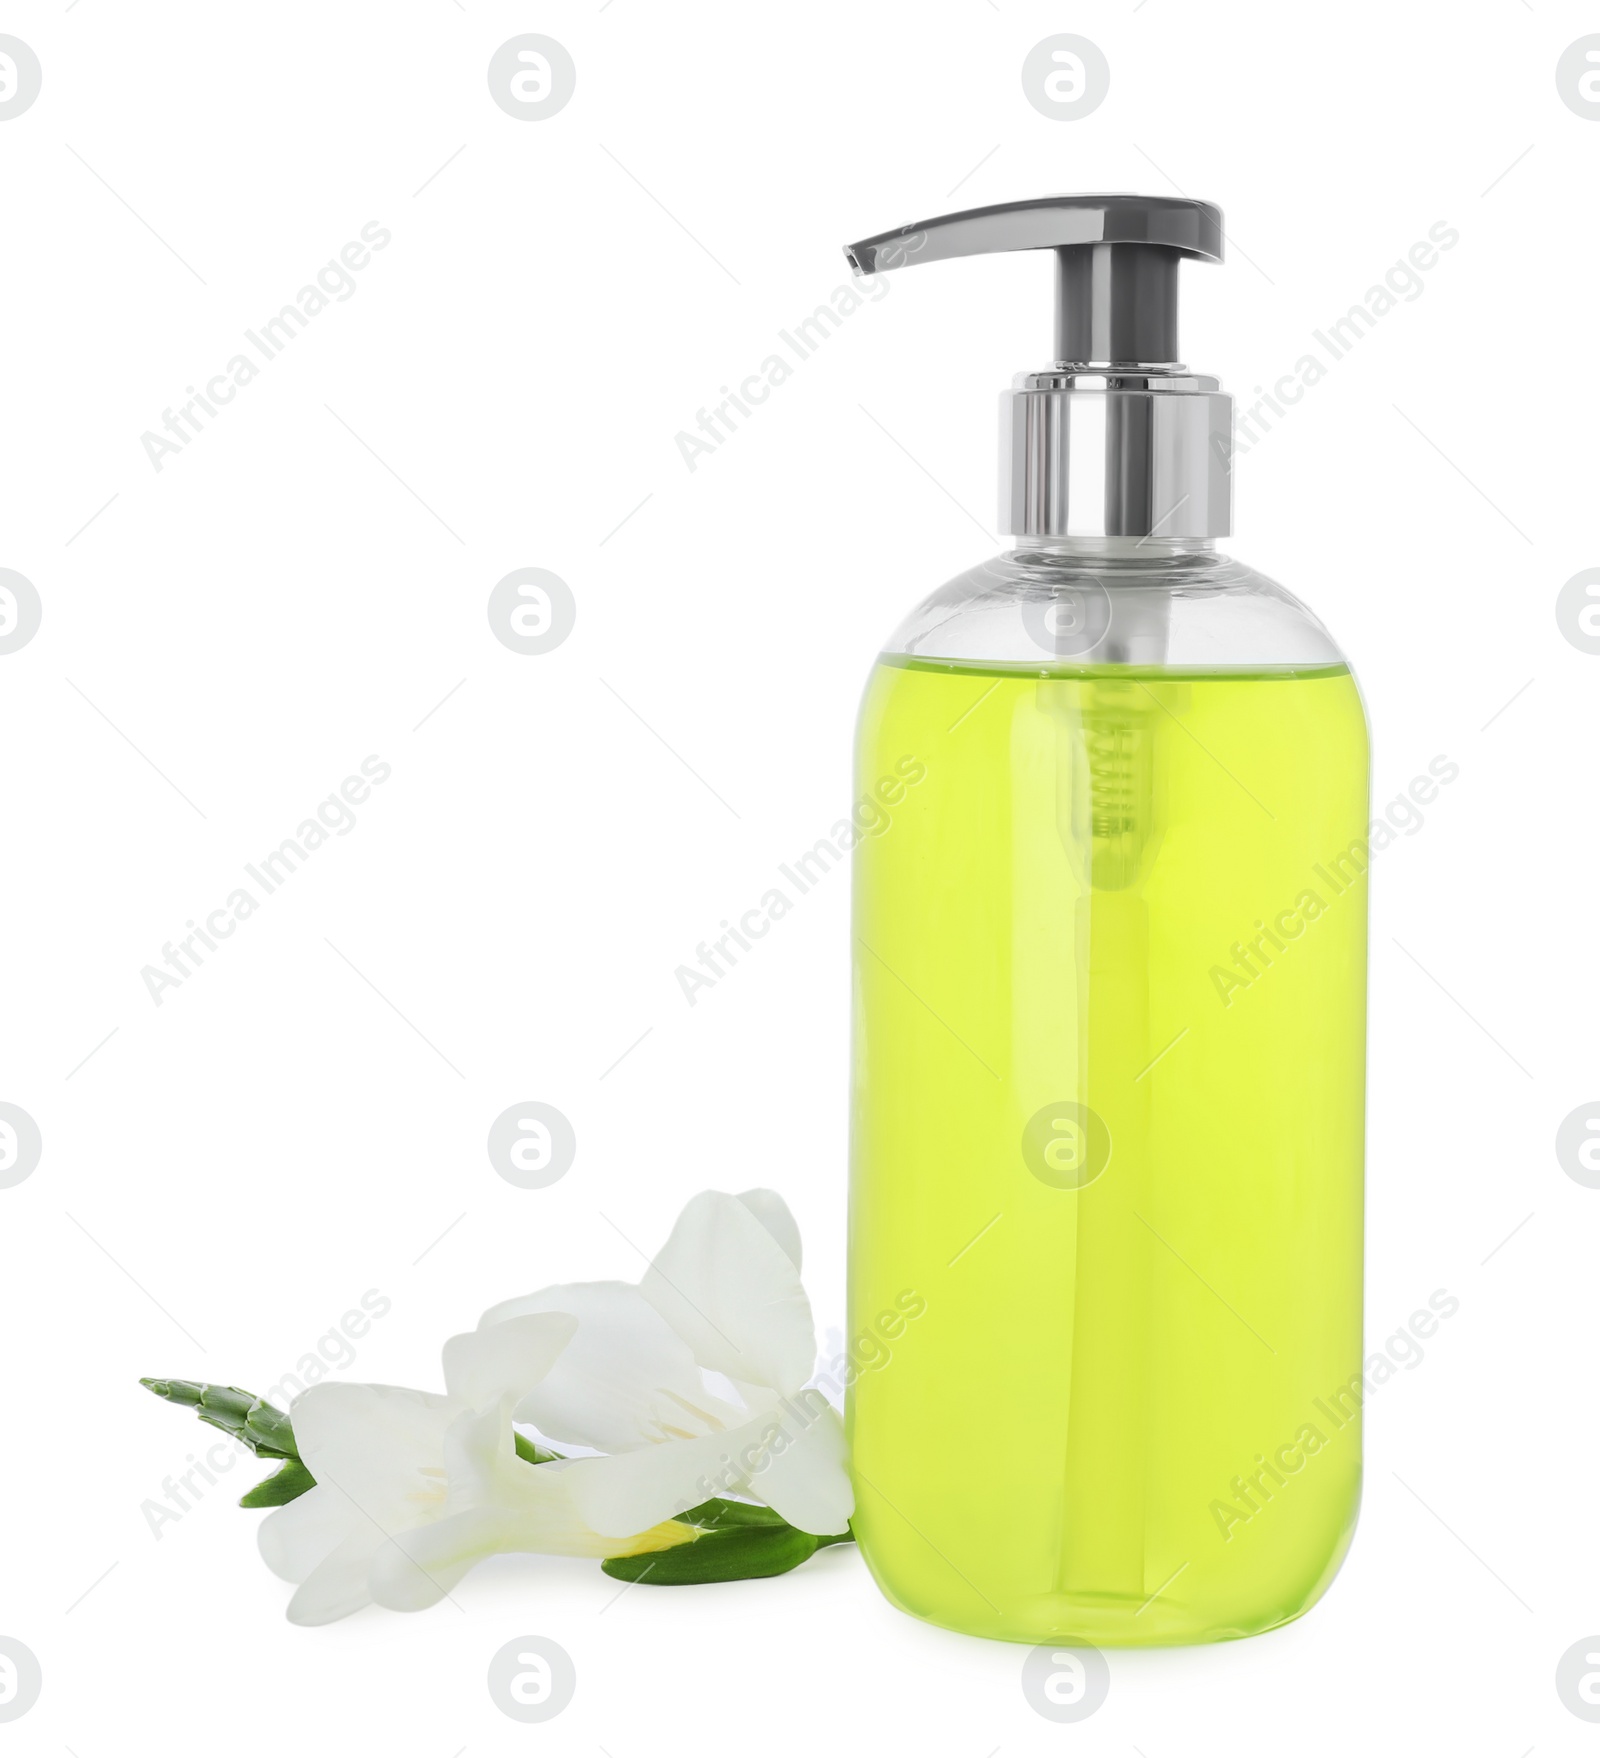 Photo of Dispenser of liquid soap and freesia flowers isolated on white